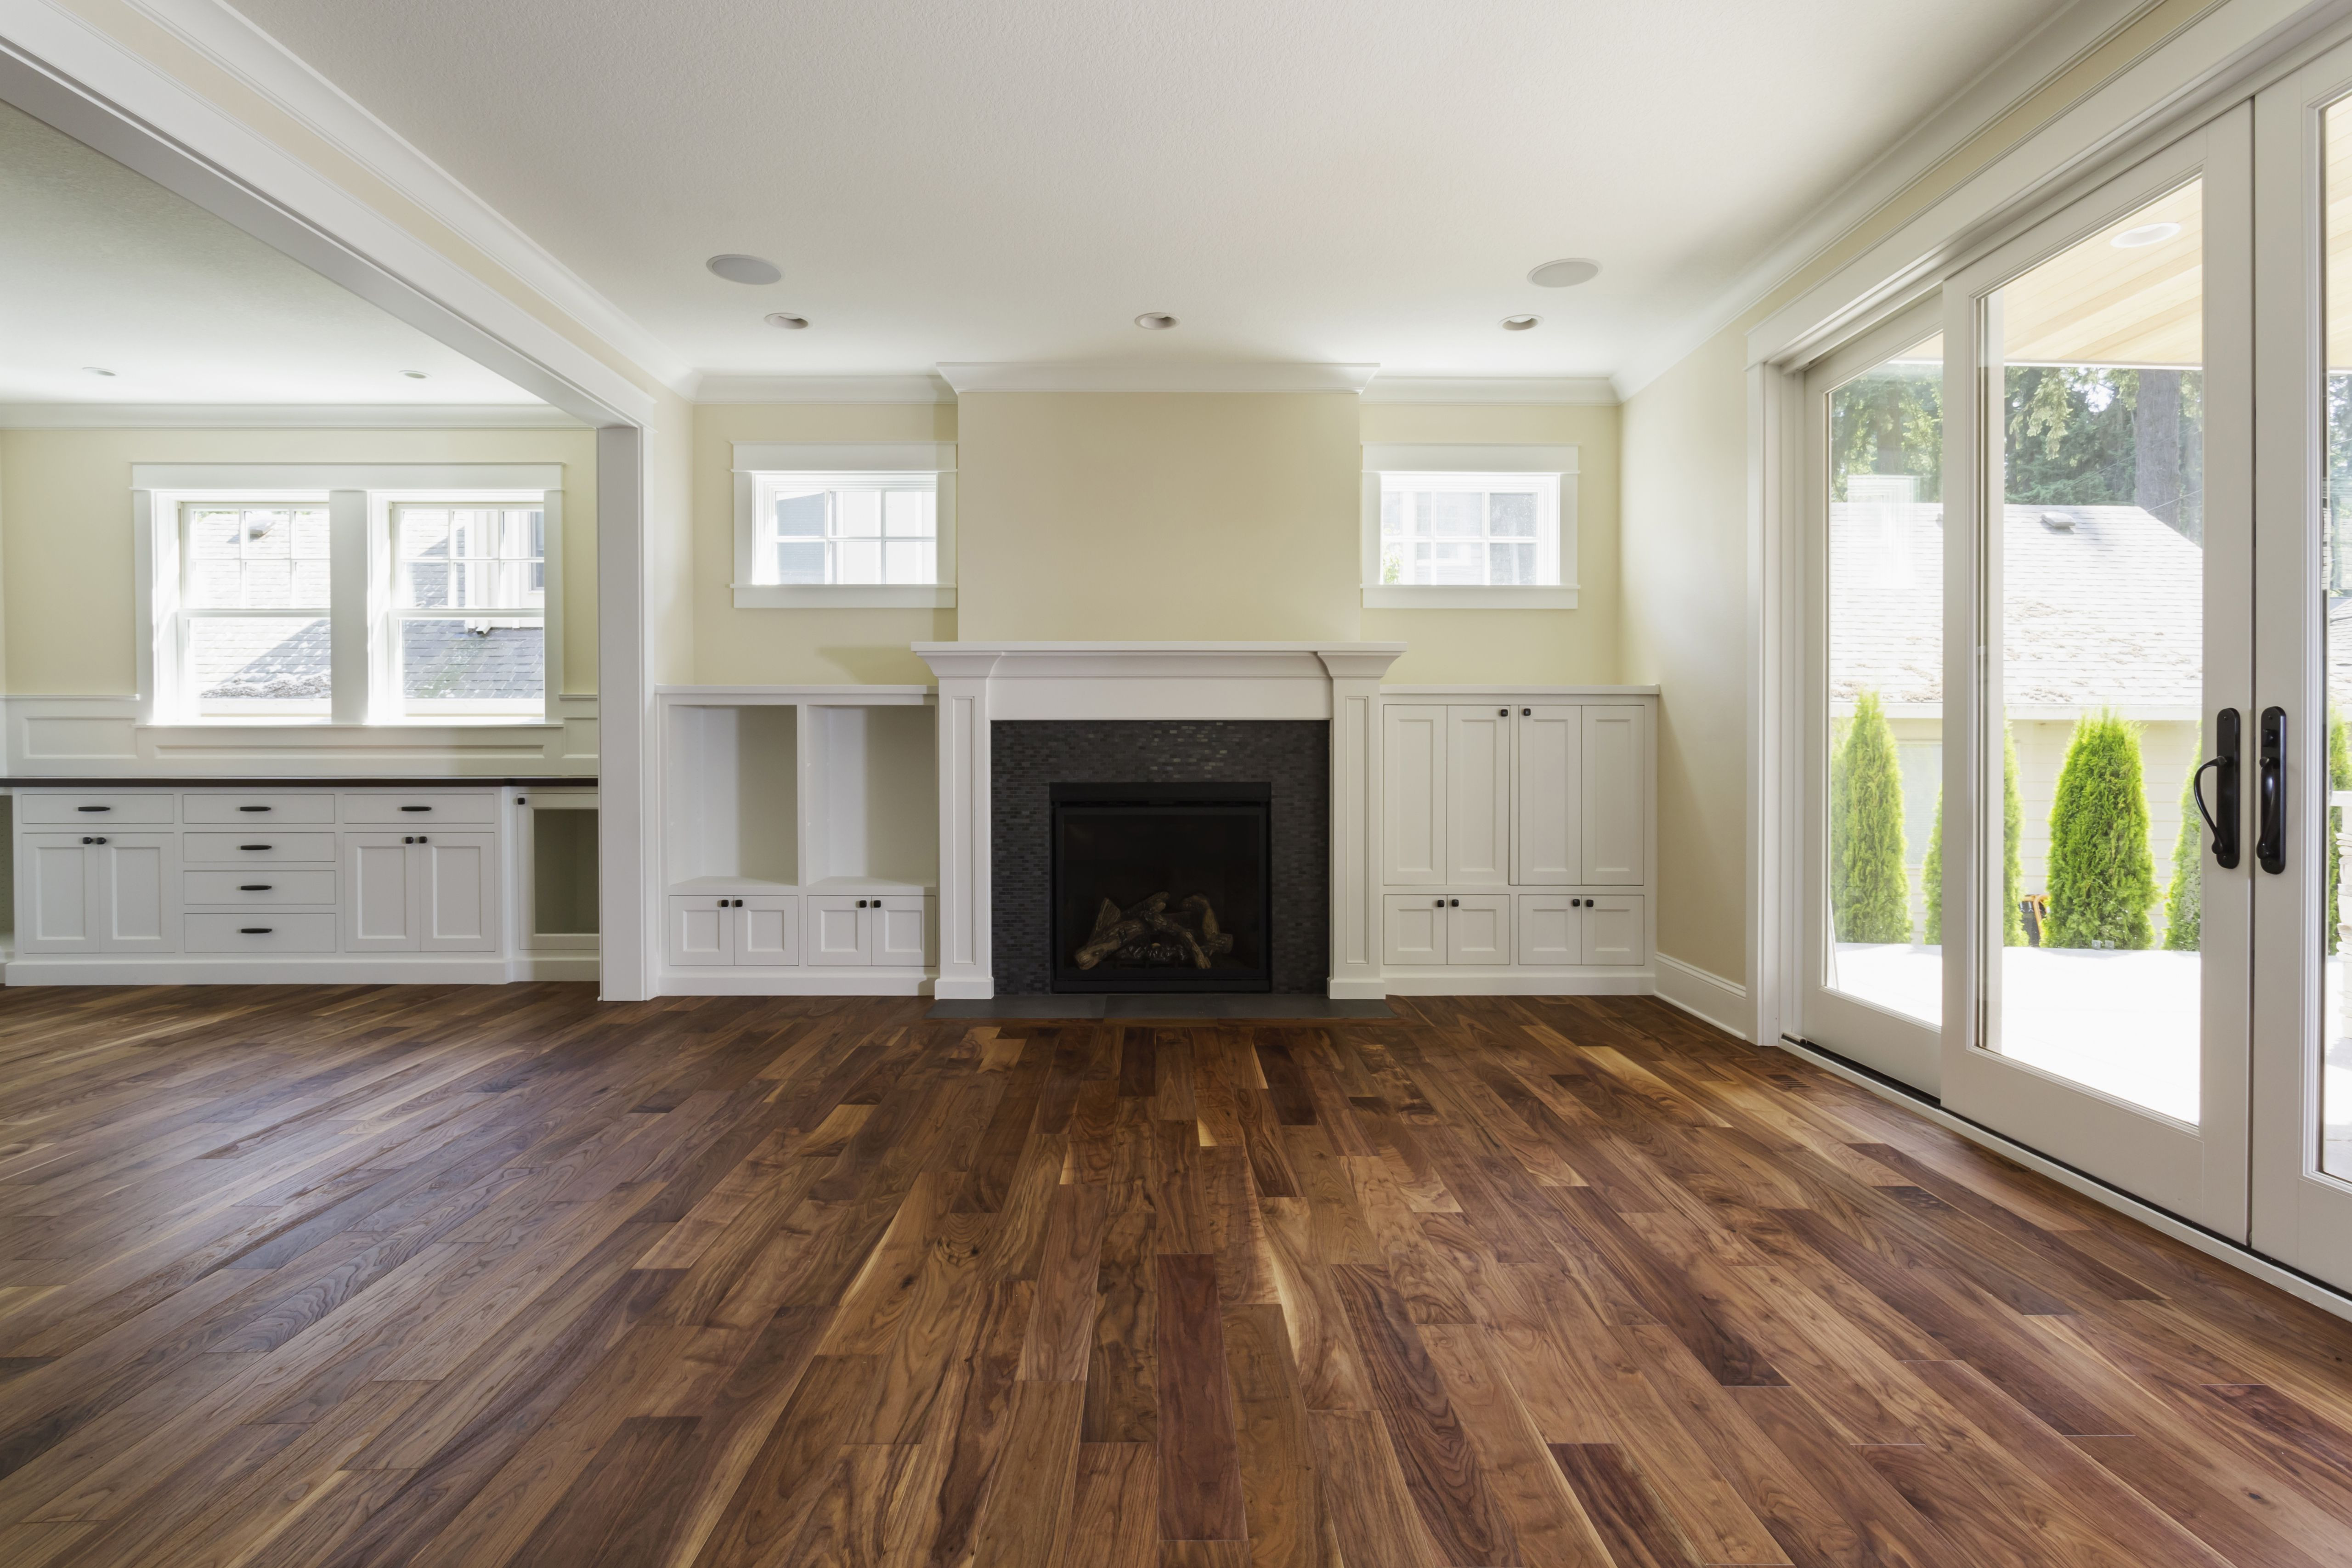 13 Cute Rustic Walnut Hardwood Flooring 2024 free download rustic walnut hardwood flooring of the pros and cons of prefinished hardwood flooring for fireplace and built in shelves in living room 482143011 57bef8e33df78cc16e035397